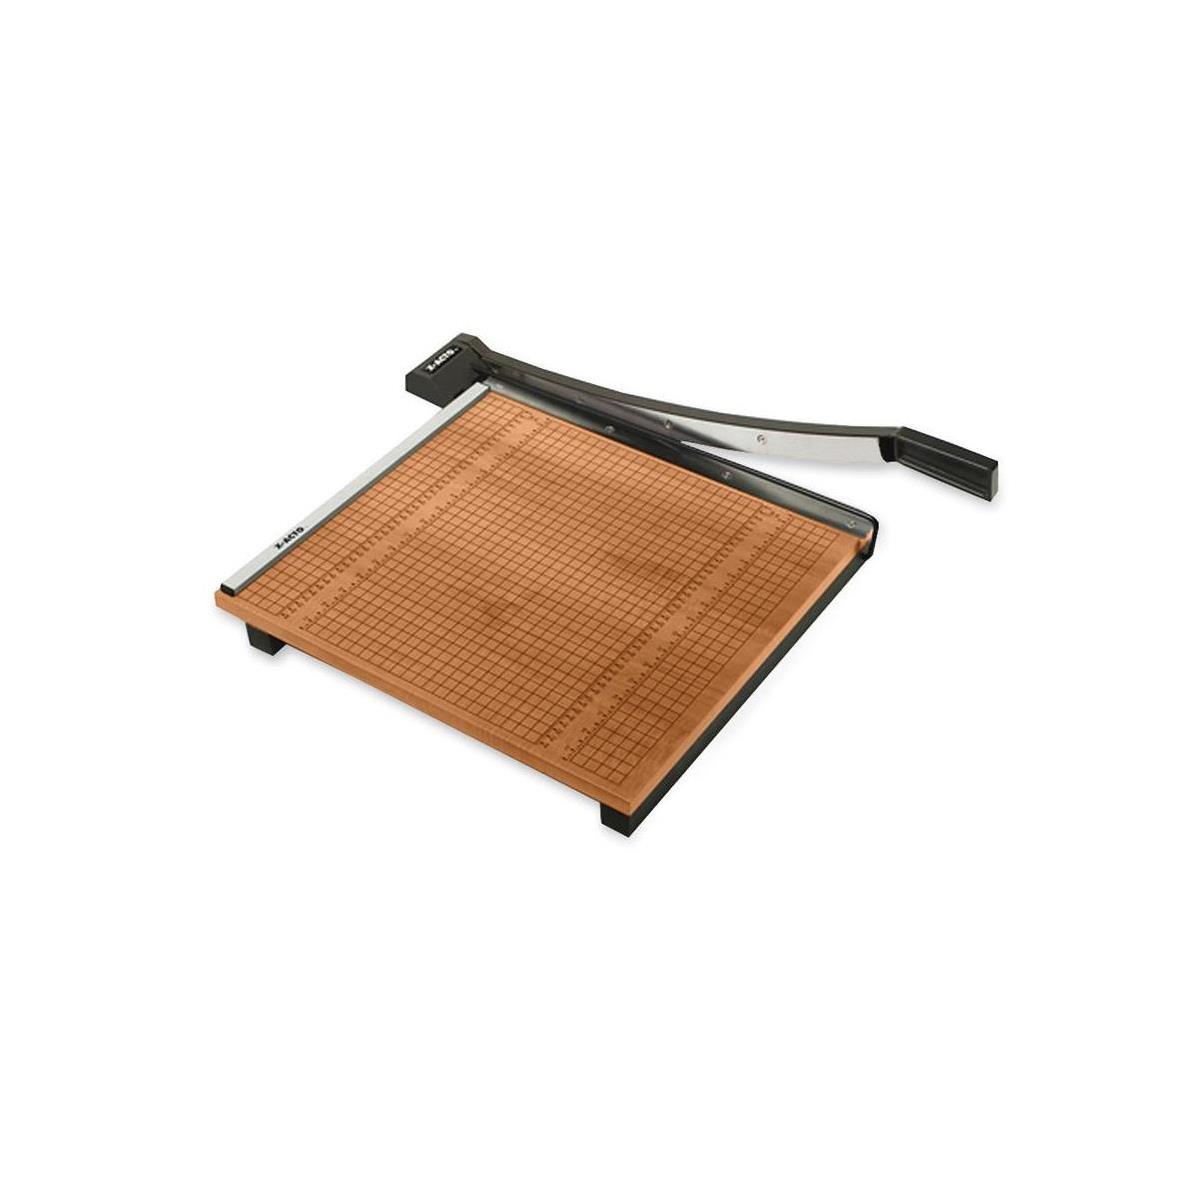 

X-Acto 18x18" Guillotine Square Trimmer - Wood base